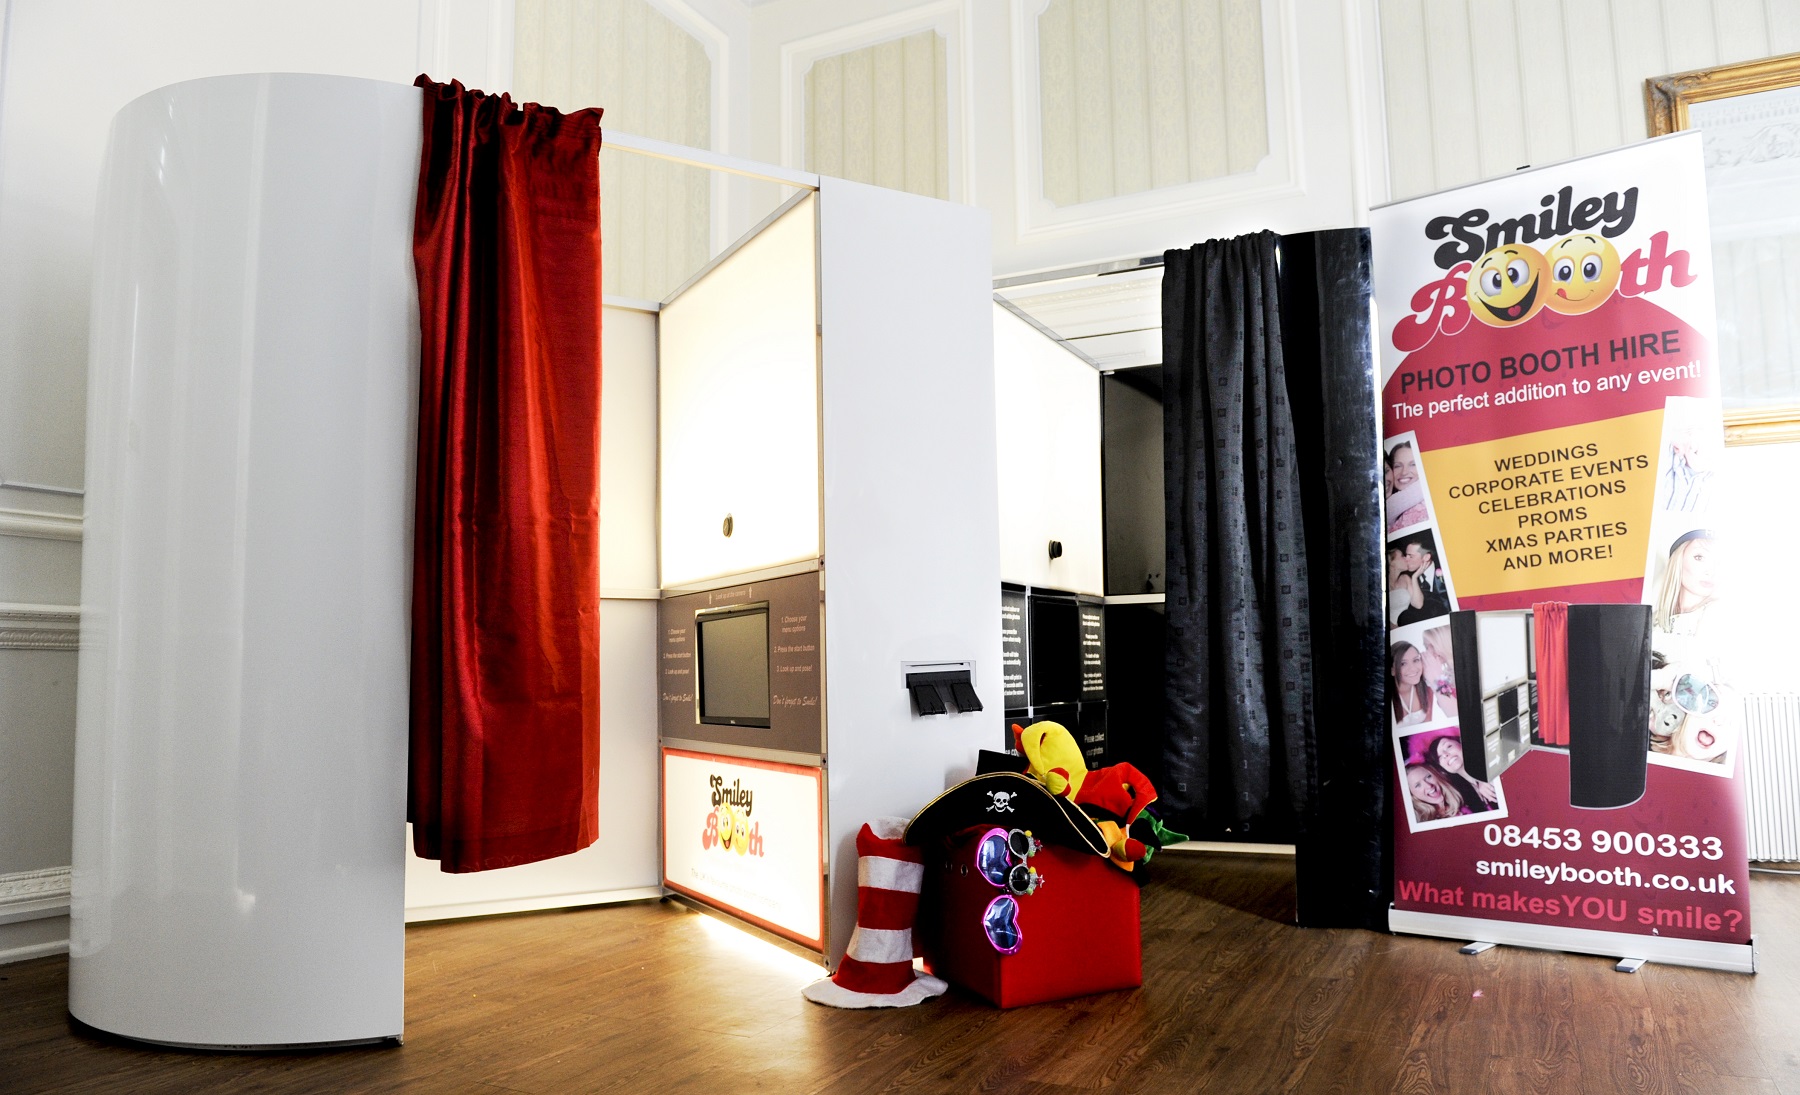 image showing white and black photo booth set up smiley booth franchise enquipment